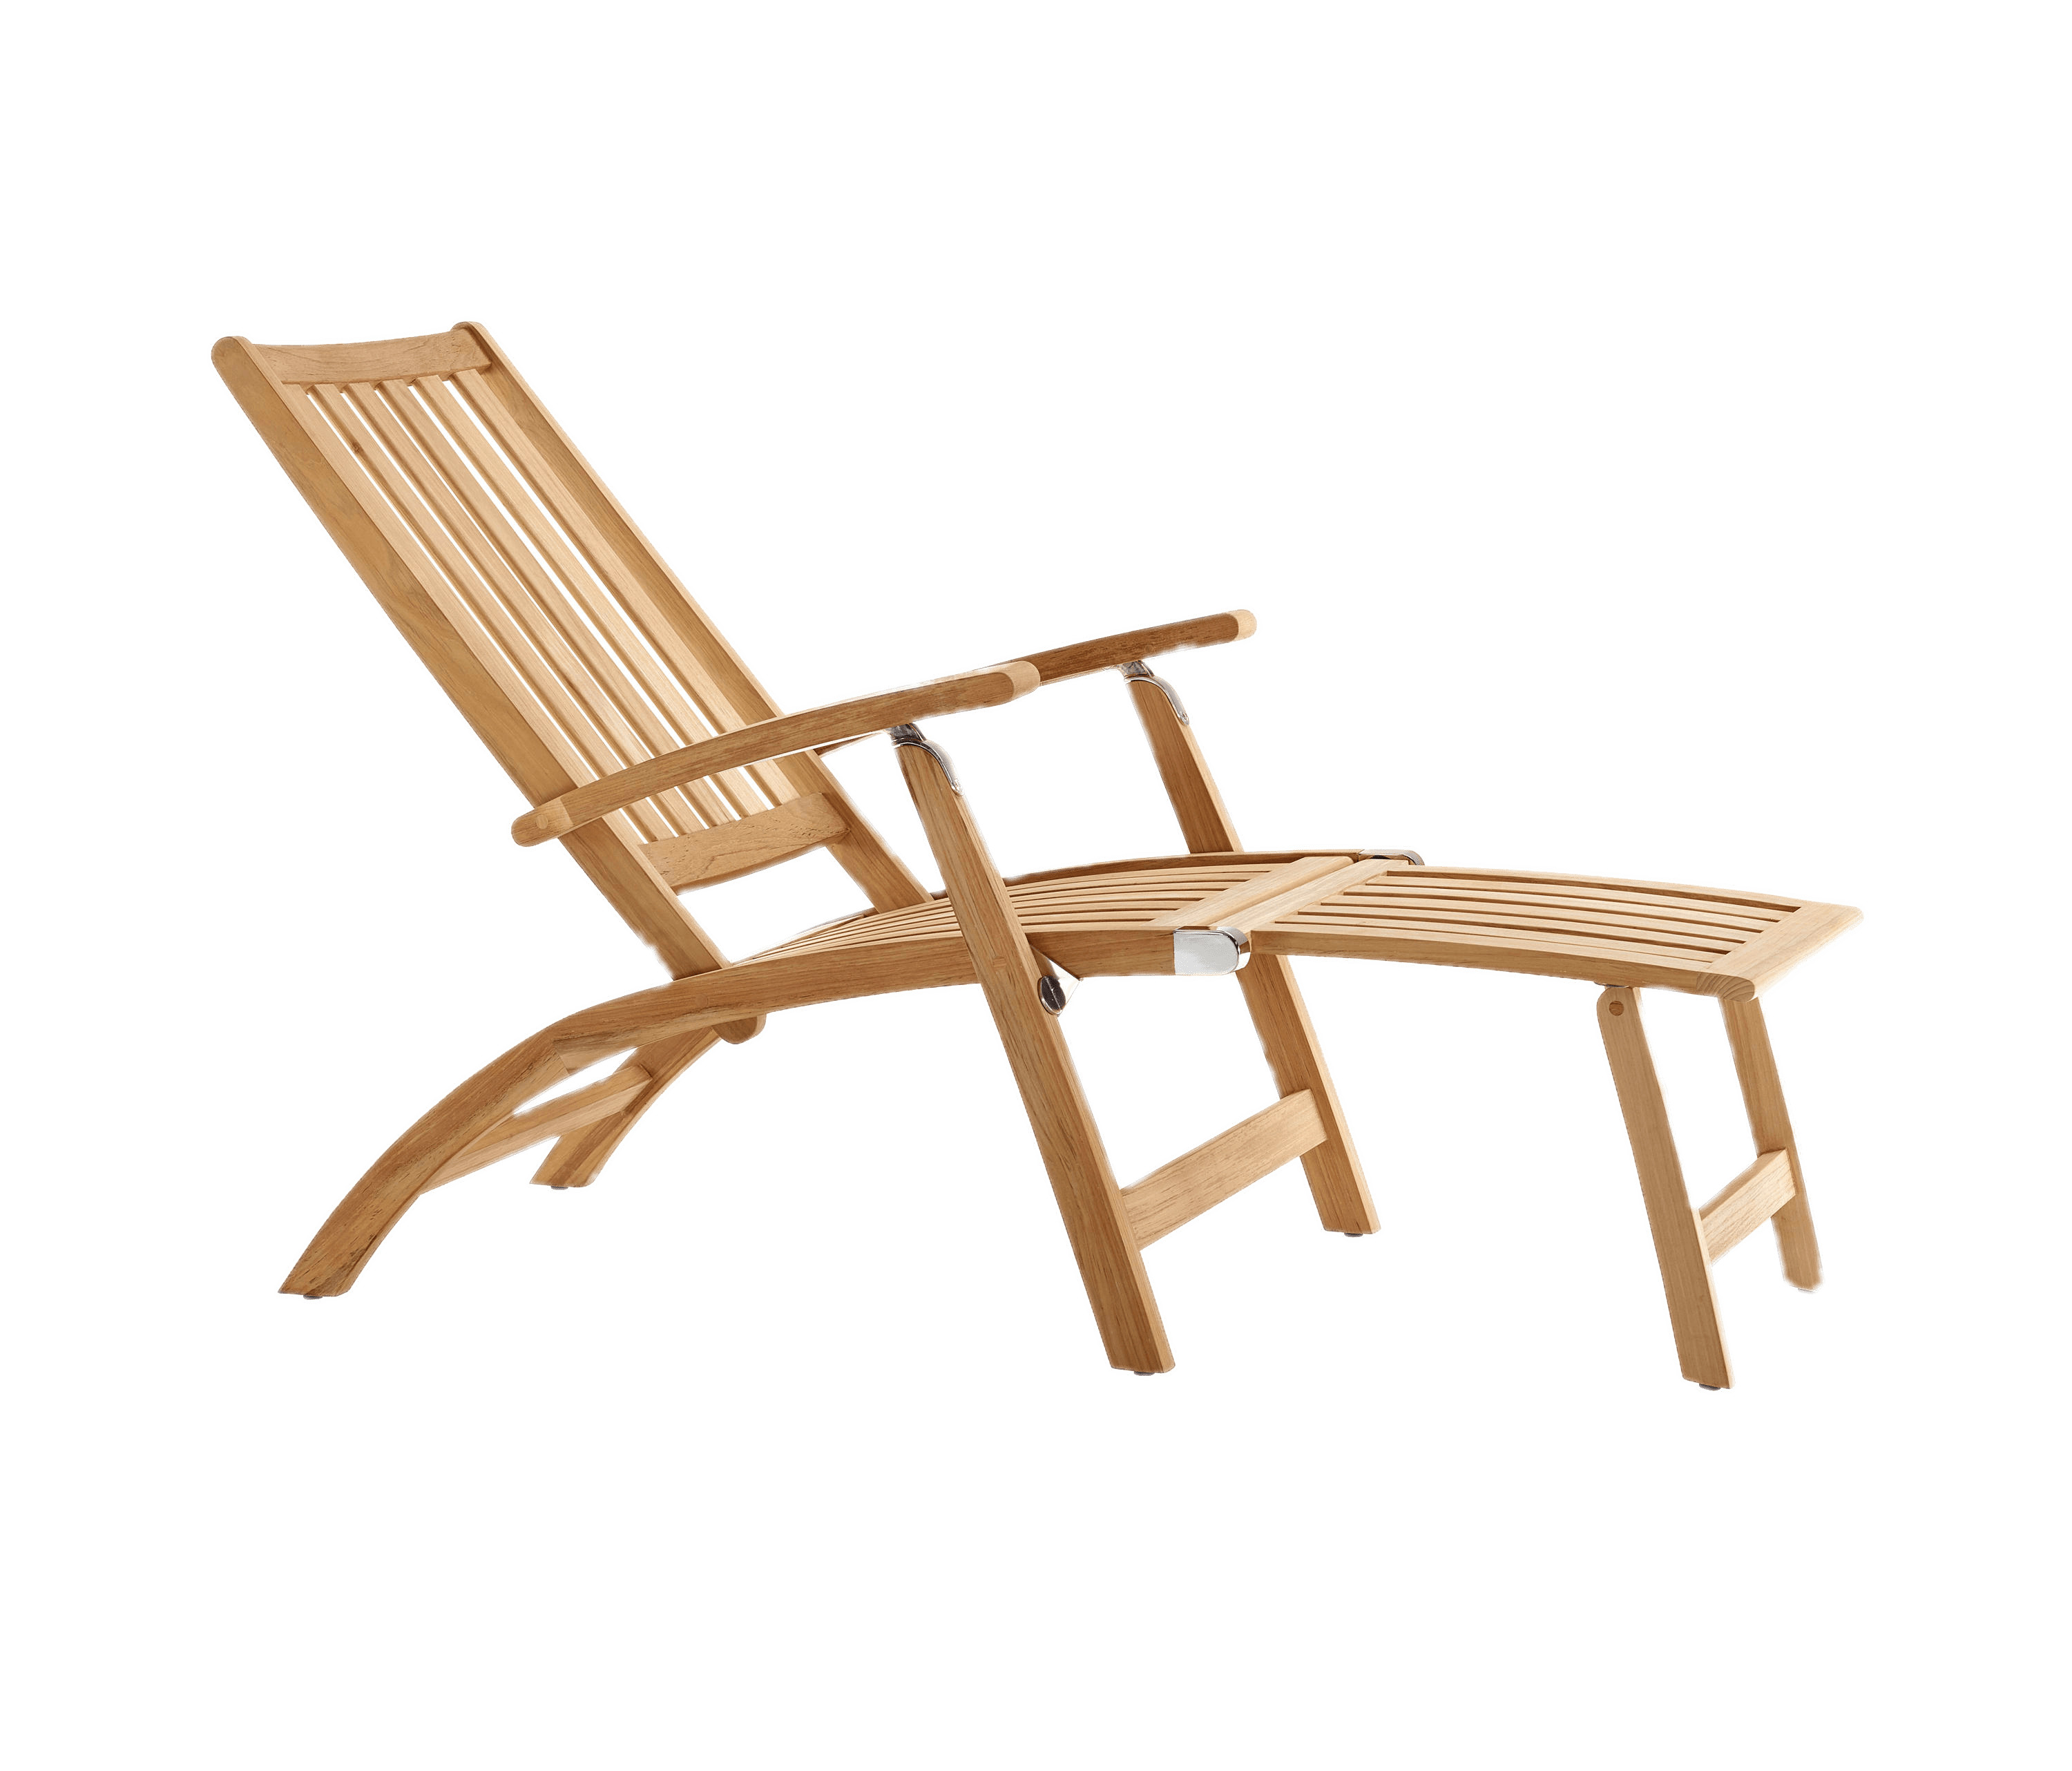 Wooden Deckchair With Foot Rest png icons